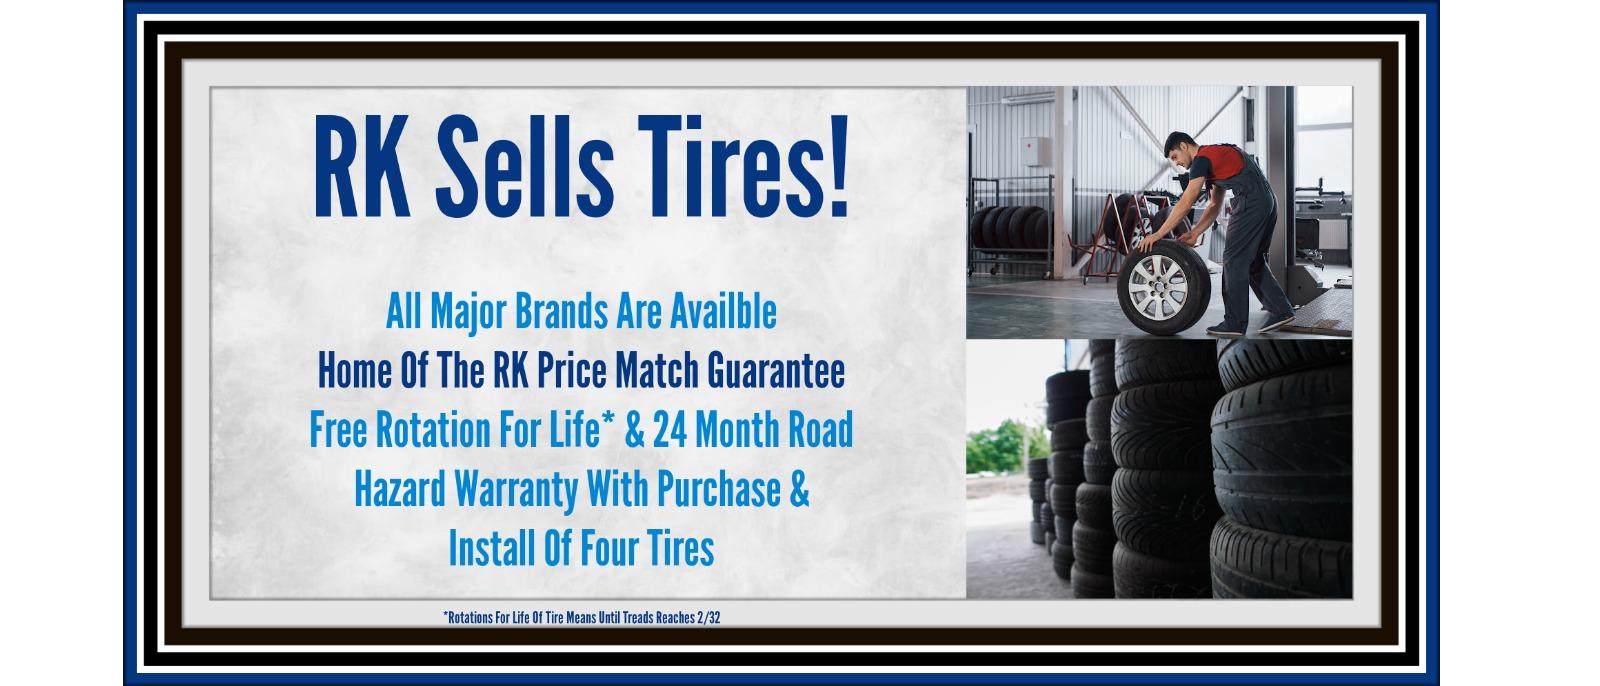 We sell Tires